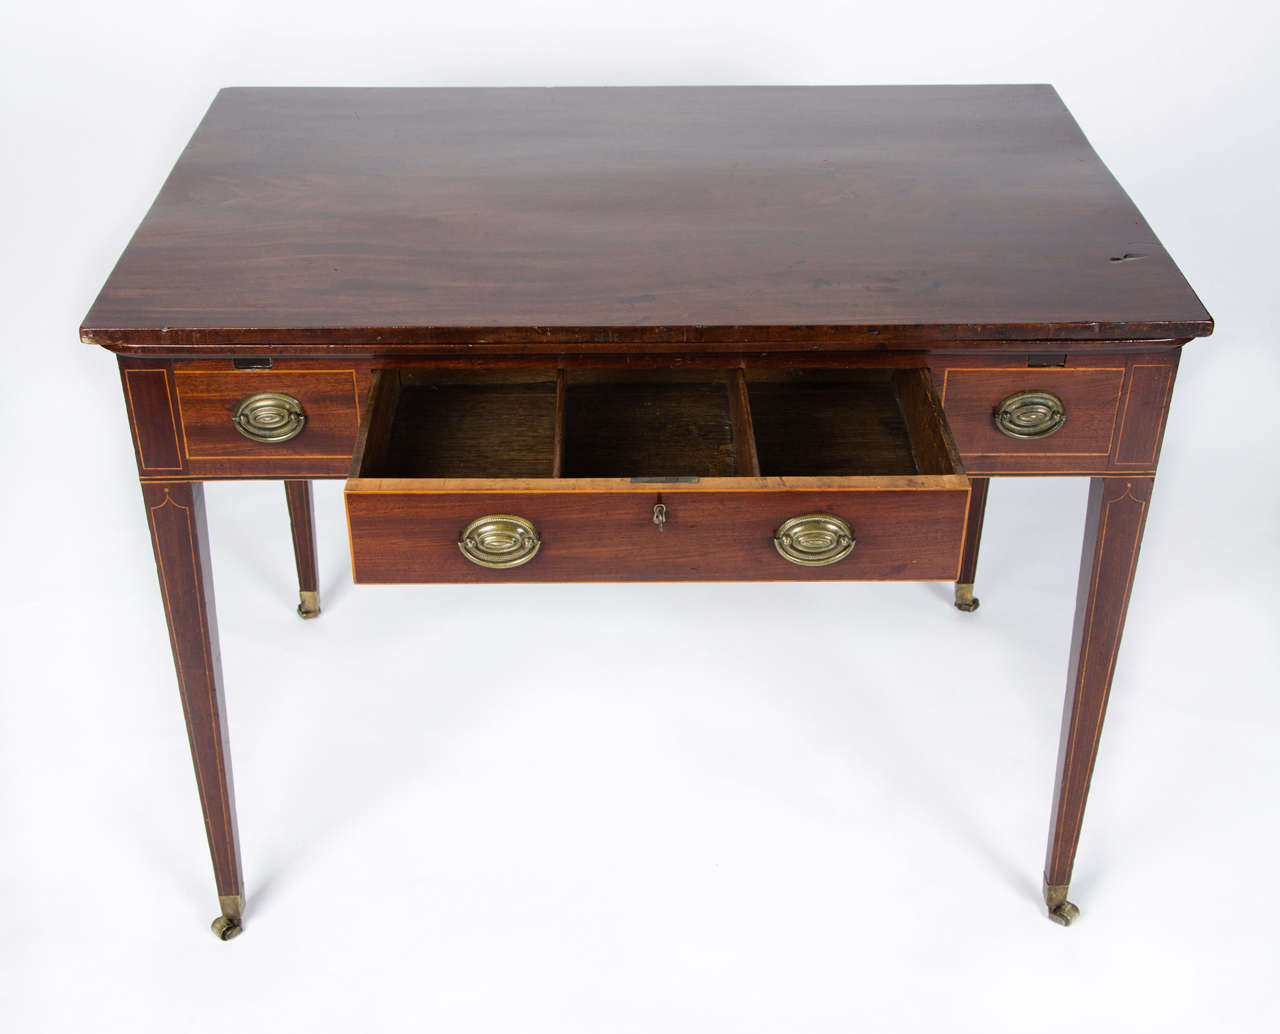 British Late 18th Century Mahogany Draw Leaf Table to a Design by Thomas Sheraton For Sale